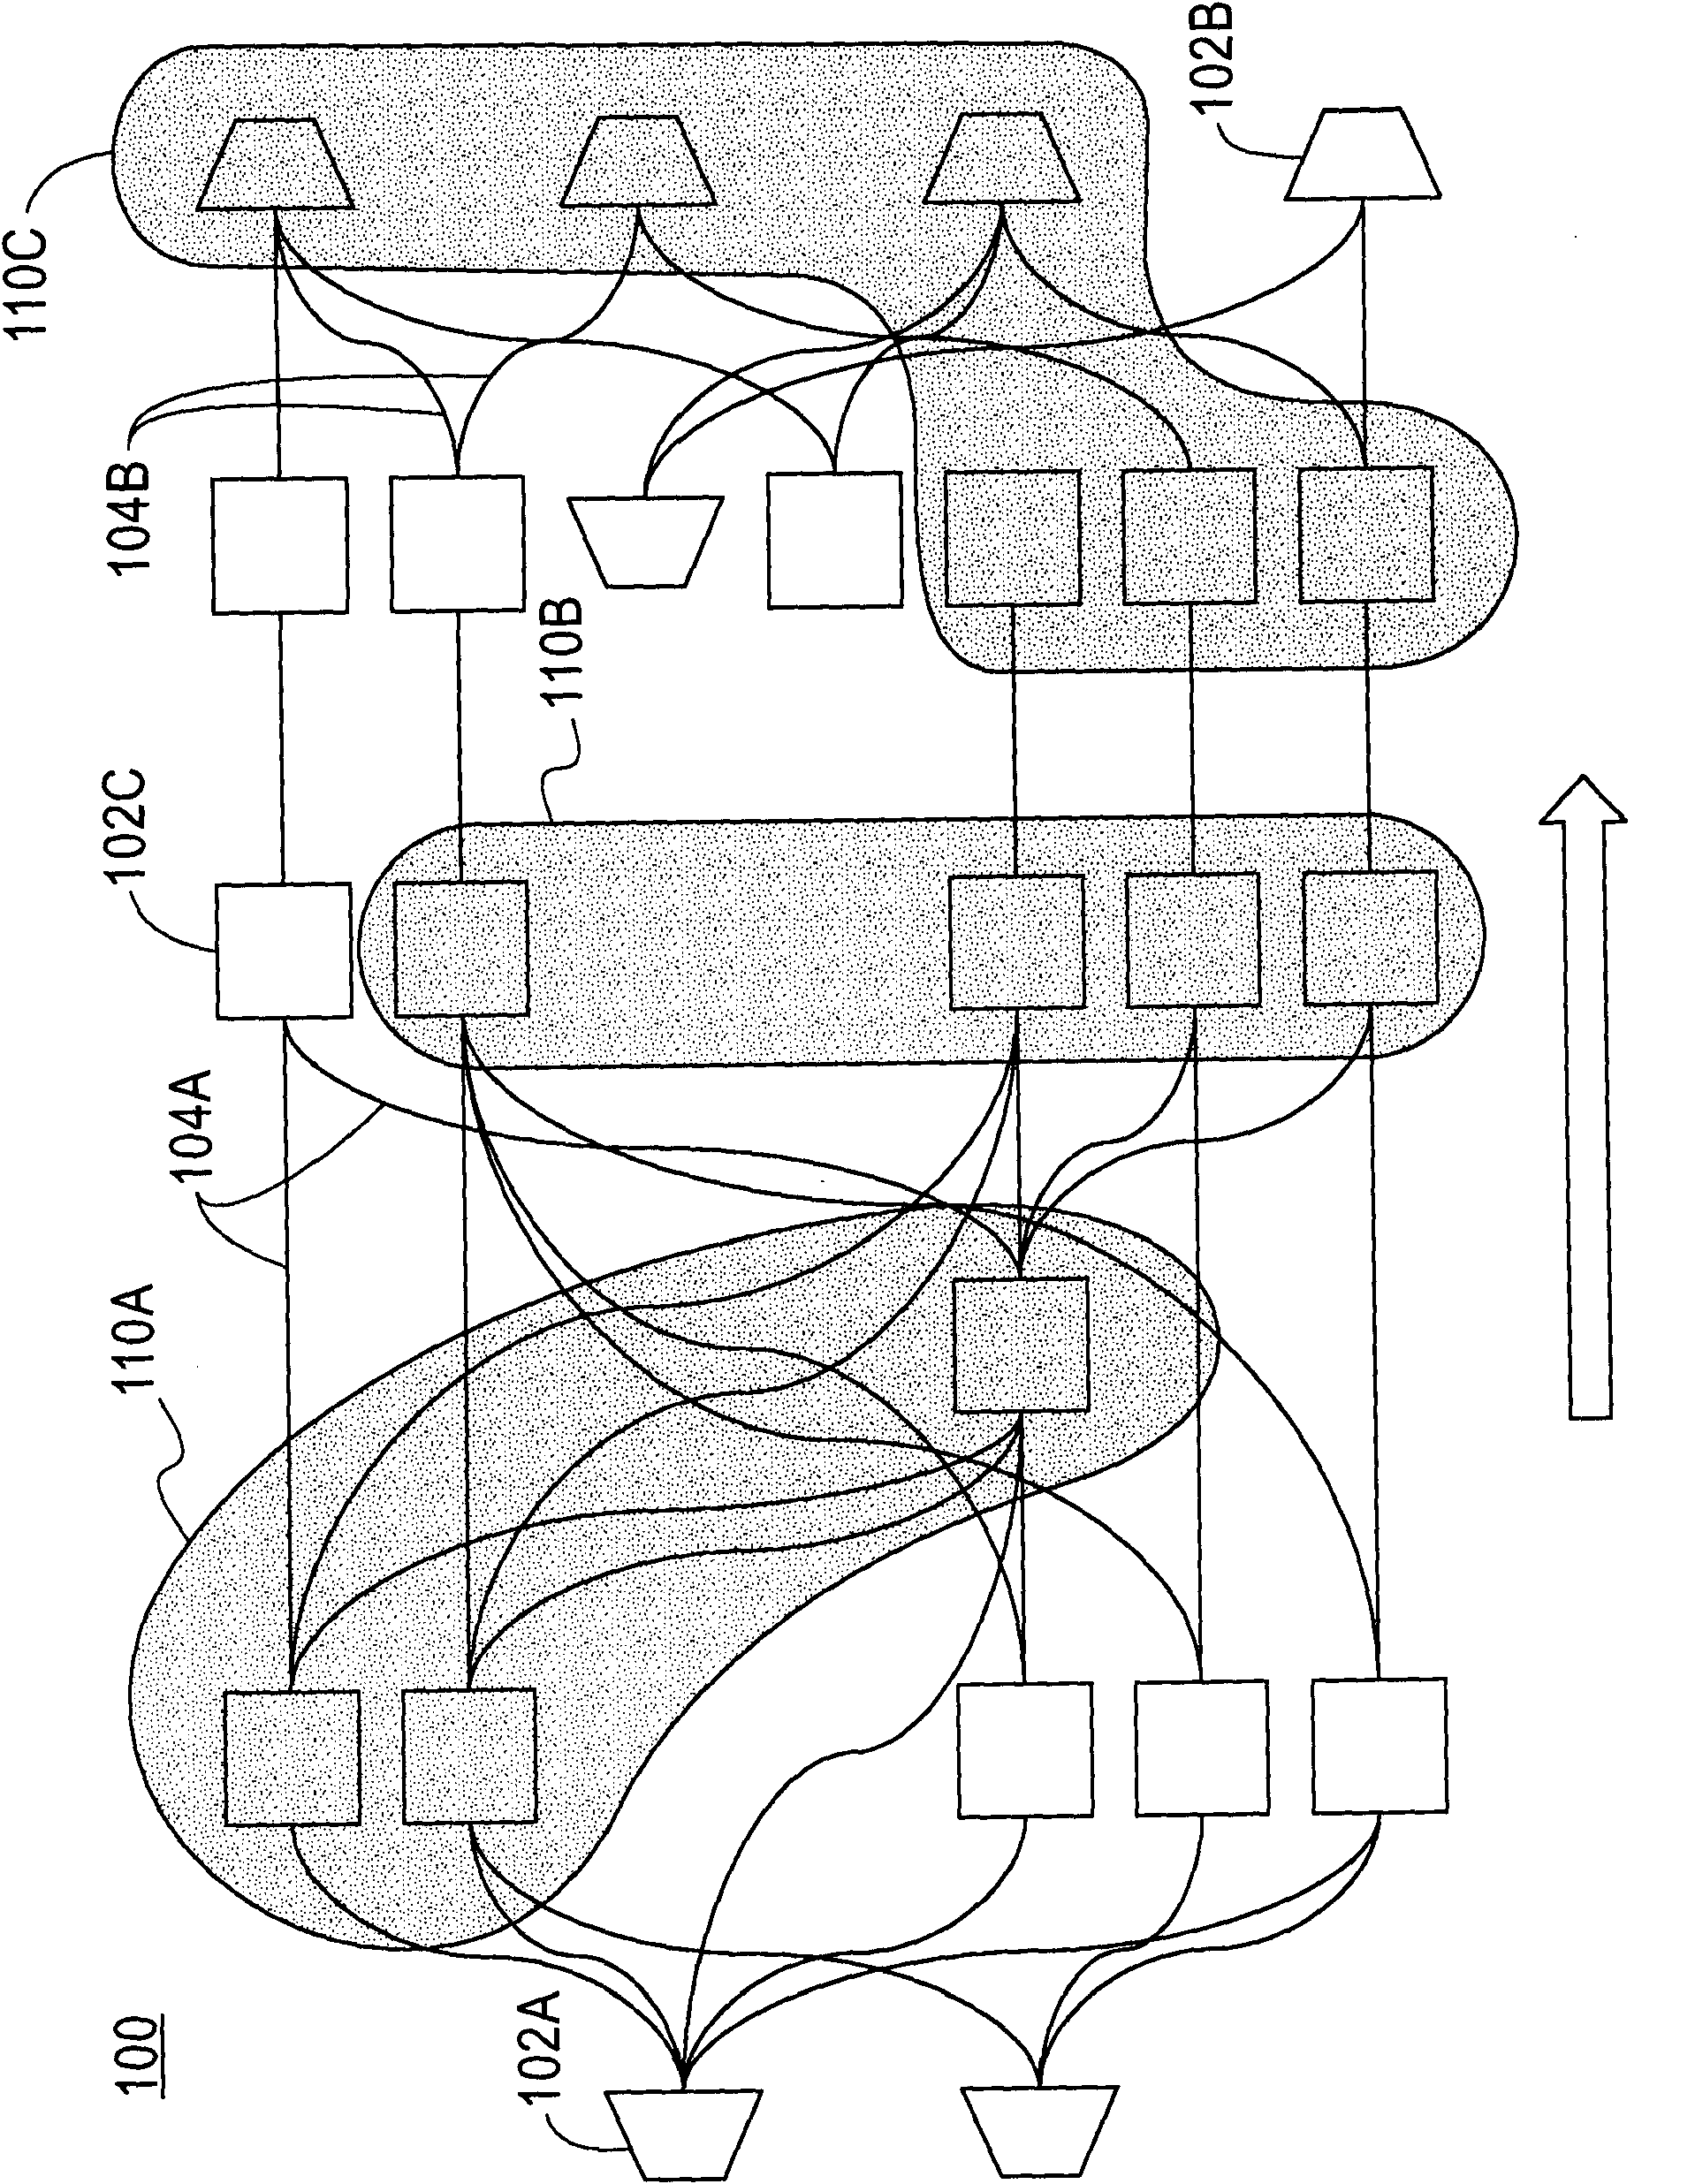 Method and system for implementing a stream processing computer architecture